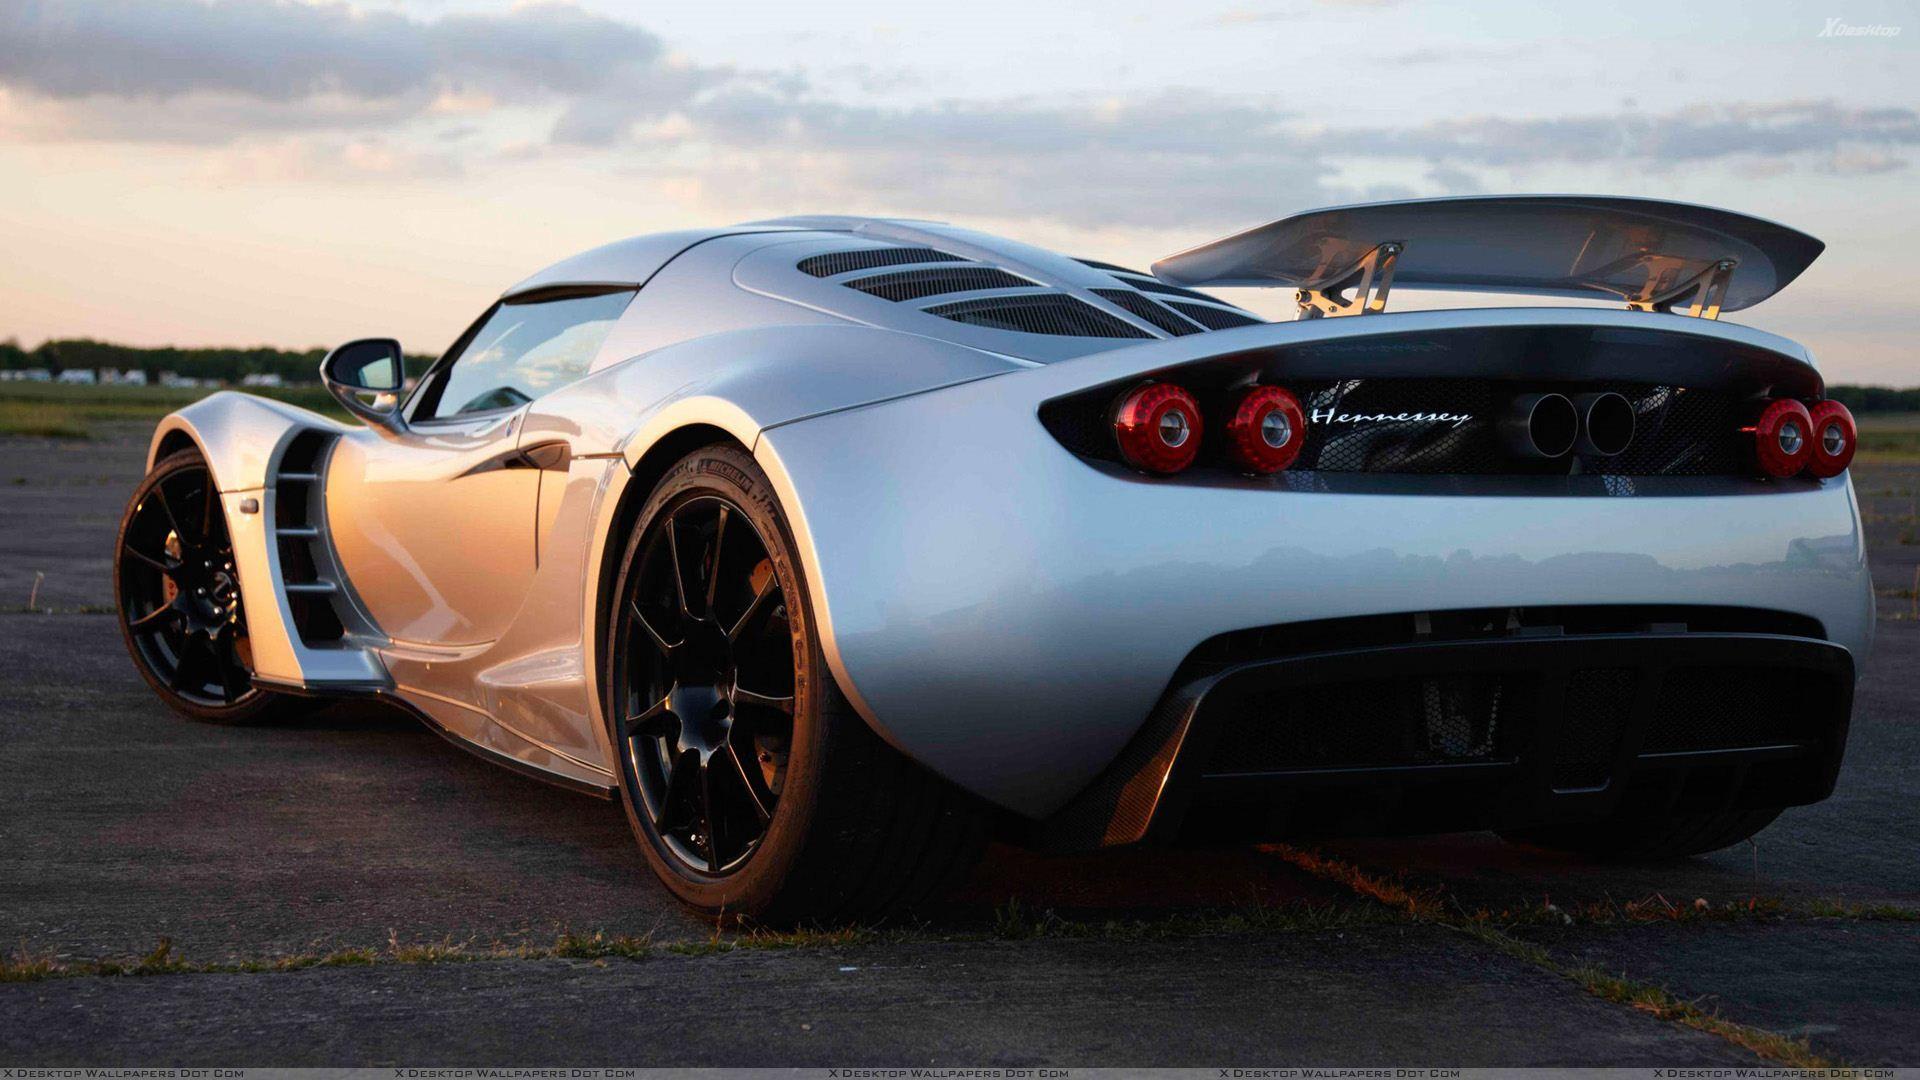 Hennessey Wallpaper, Photo & Image in HD